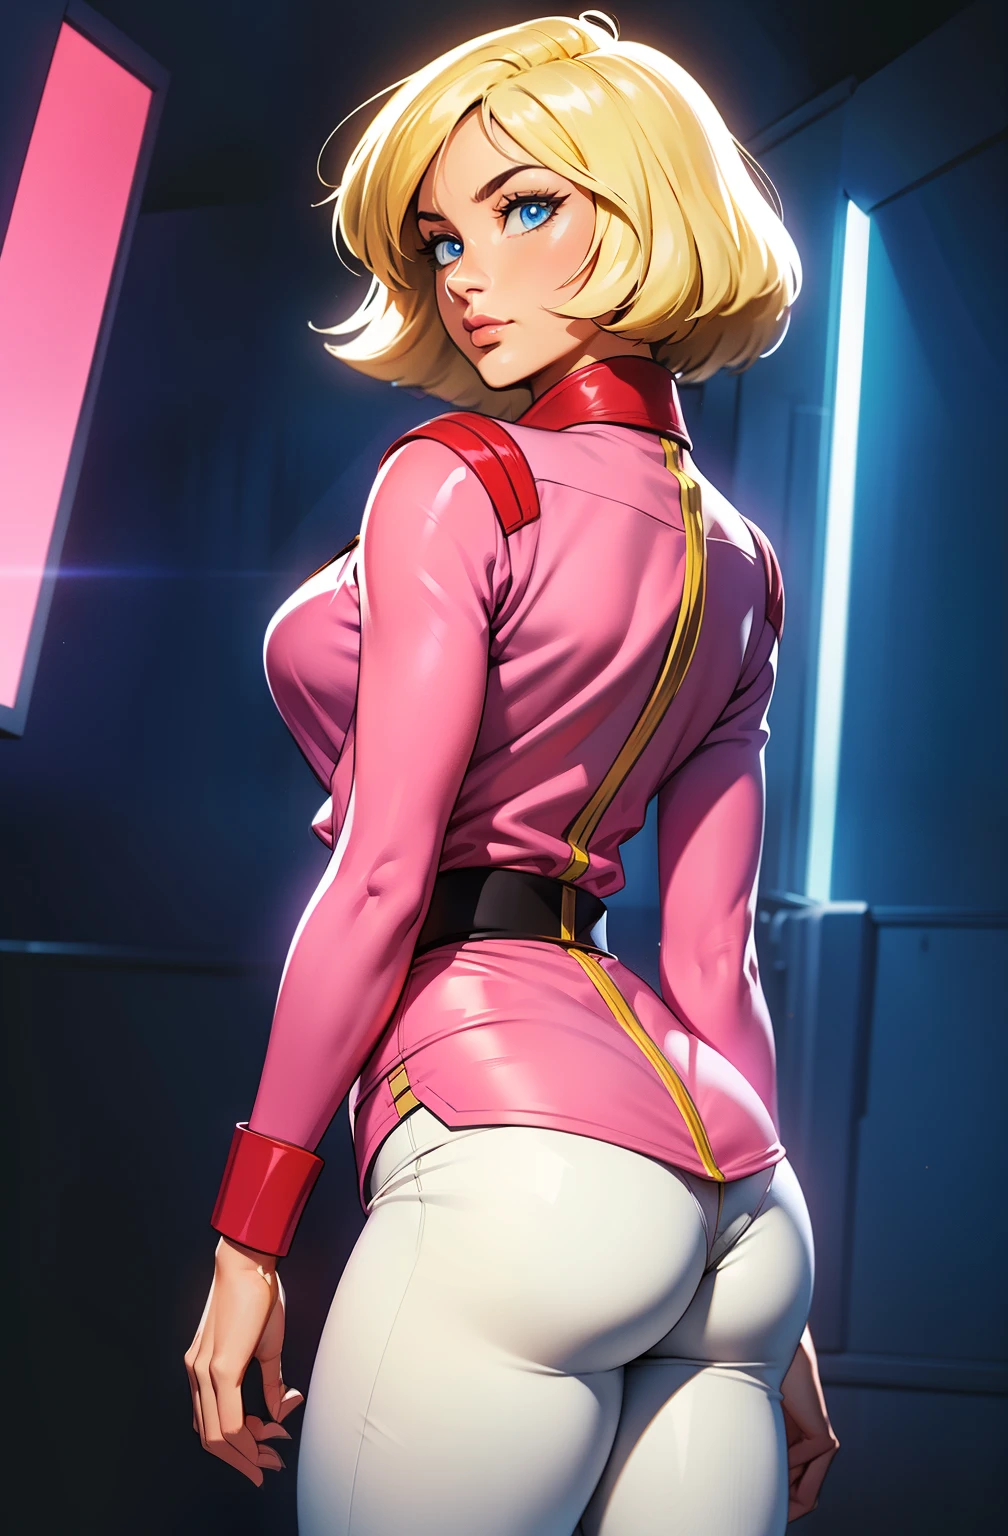 ((masterpiece)), ((cinematic lighting)), realistic photo、Real Images、Top image quality、1girl in, sayla mass, Elegant, masterpiece, Convoluted, slim arms, wide hips, thick thighs, thigh gaps, Best Quality, absurderes, high face detail, Perfect eyes, mature, Cowboy Shot, , Vibrant colors, soft pink uniform, soft pink Skirt, white tights, side view, shapely butt